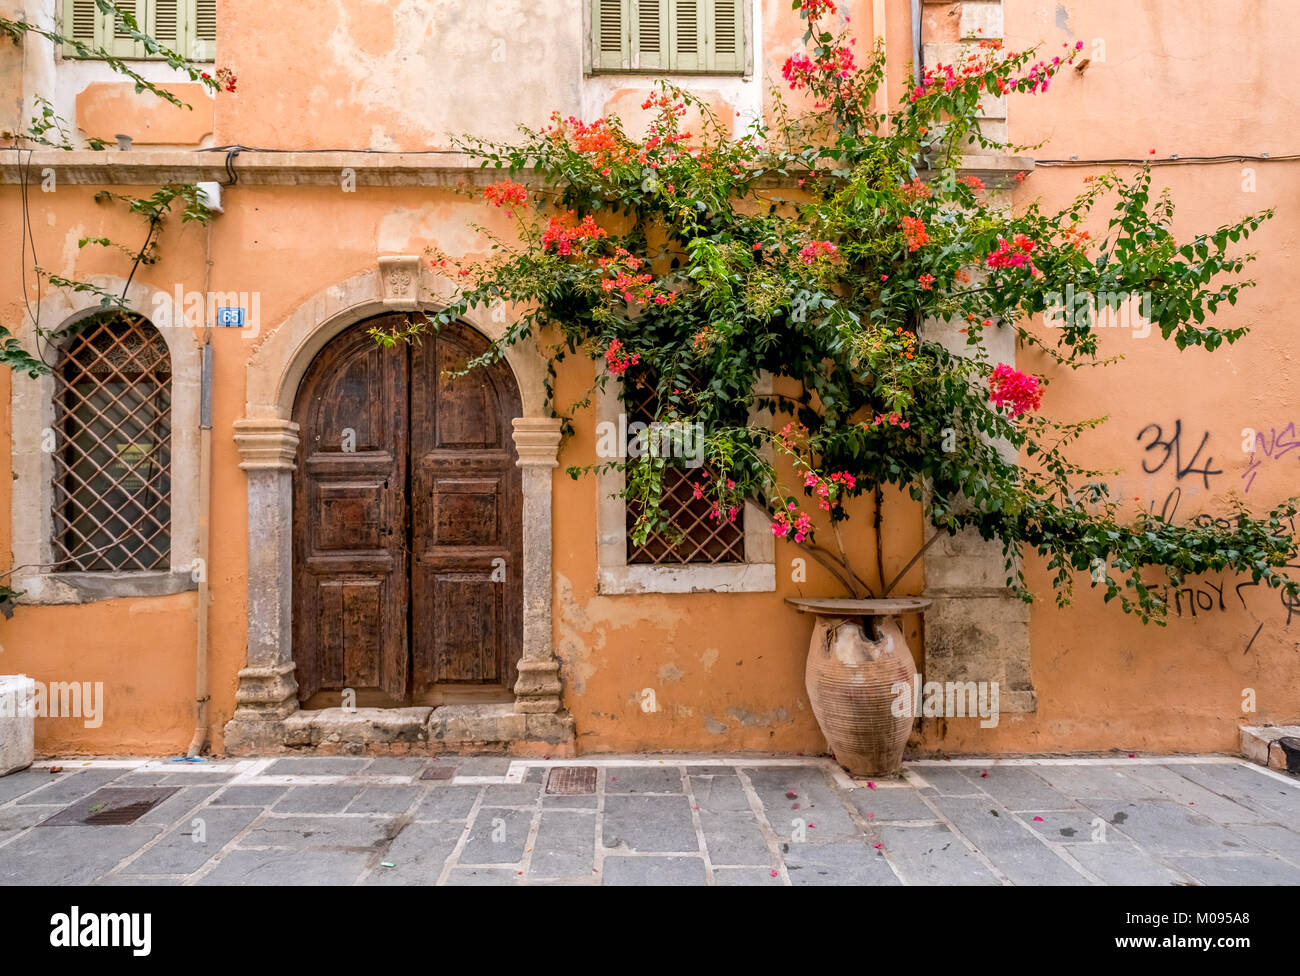 old door and entrance with plants in the old town of Rethymno, Europe, Crete, Greece, ,, Rethymno, Europe, Crete, Greece, travel, tourism, destination Stock Photo